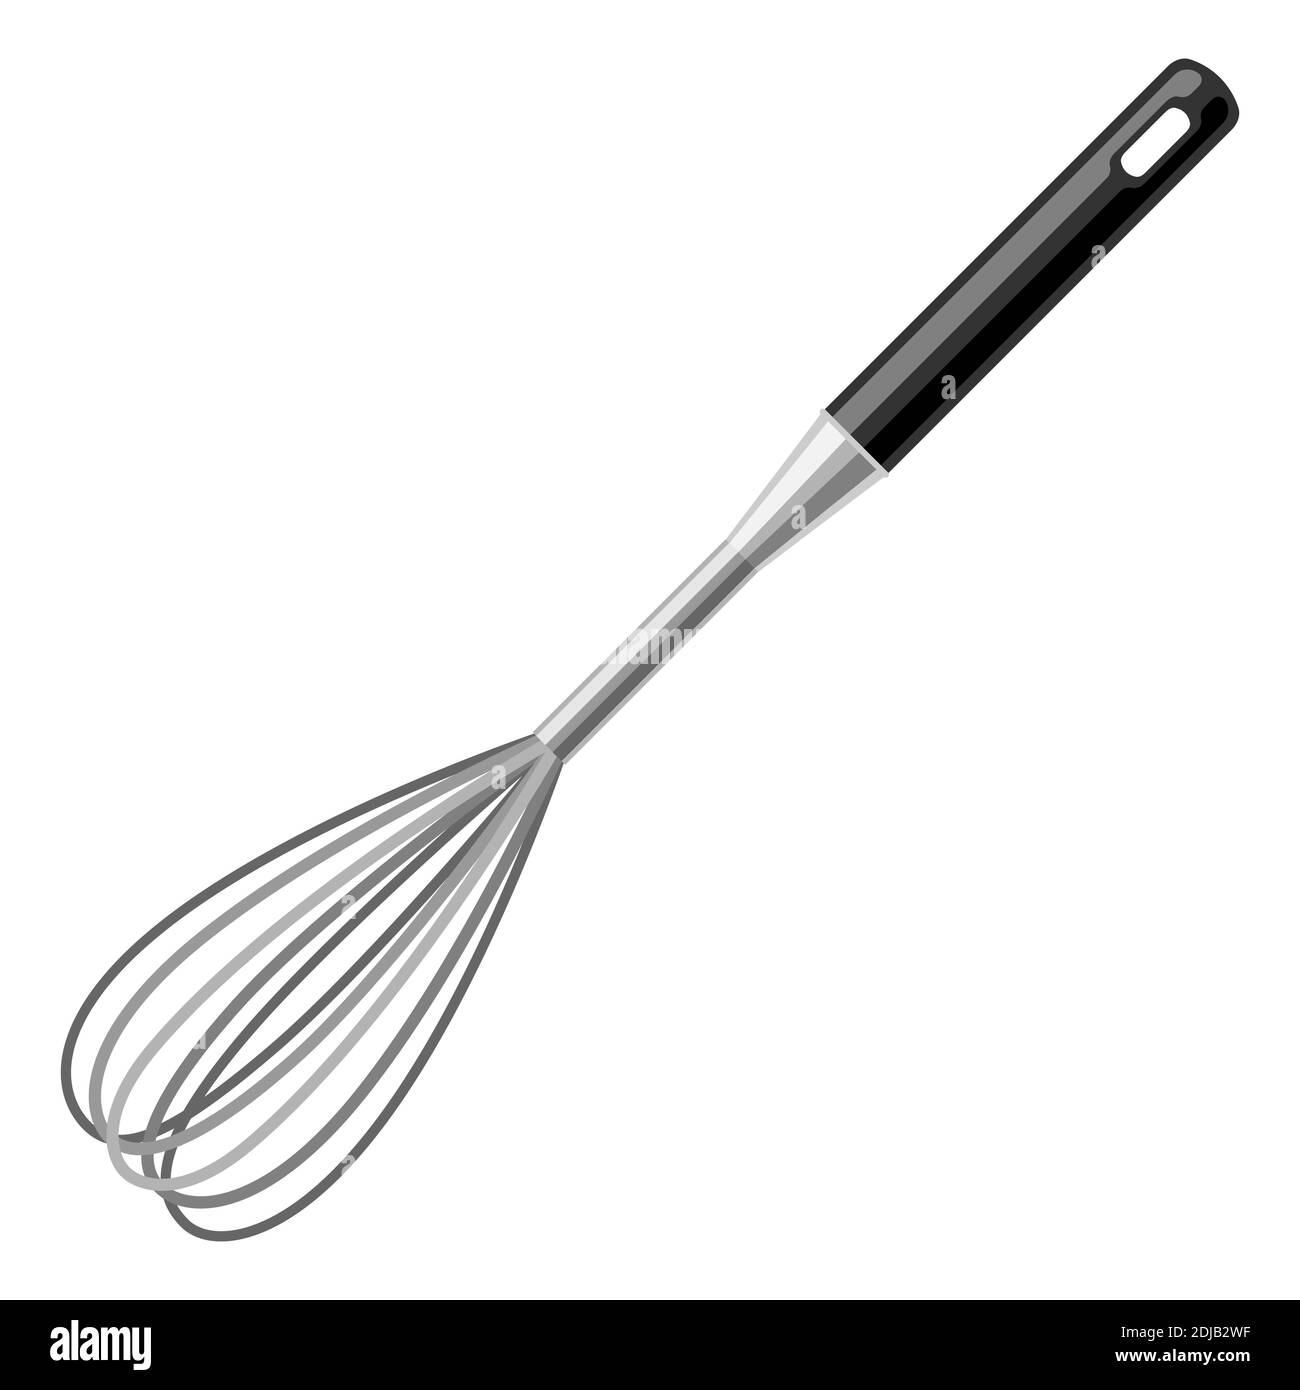 Illustration of steel cooking whisk. Stock Vector